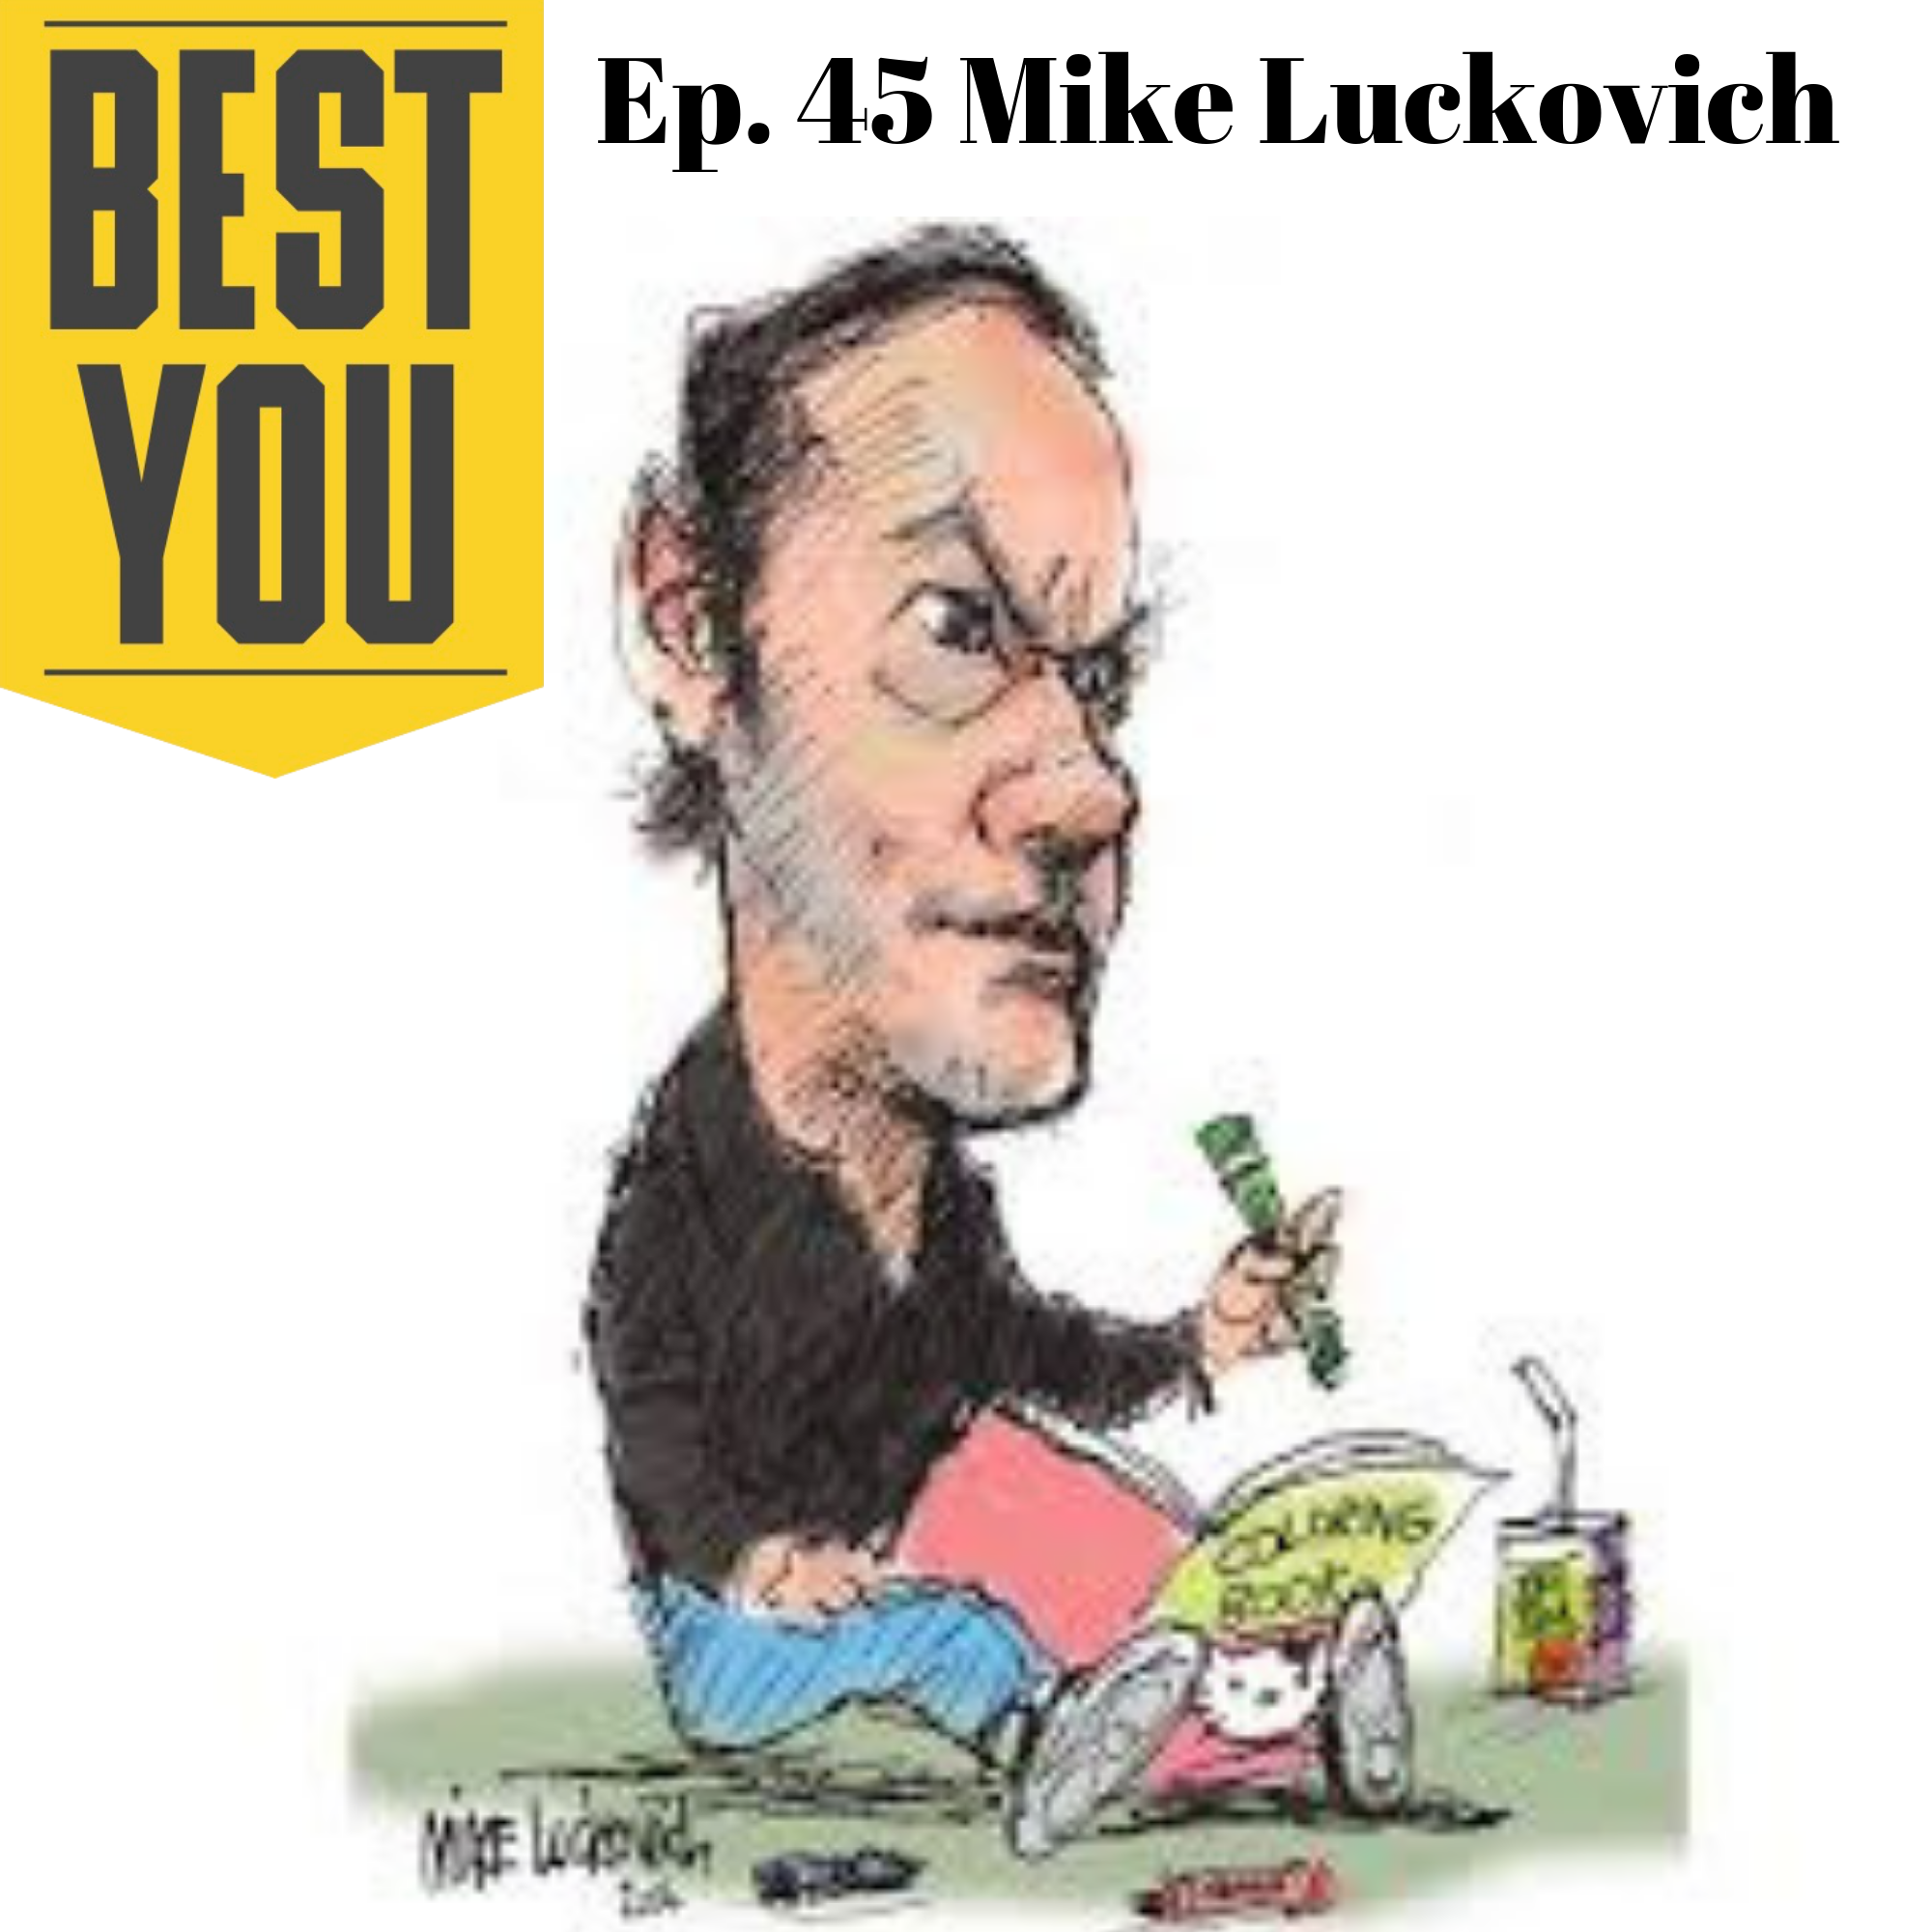 Ep. 90 Mike Luckovich - The Benefits of Procrastination